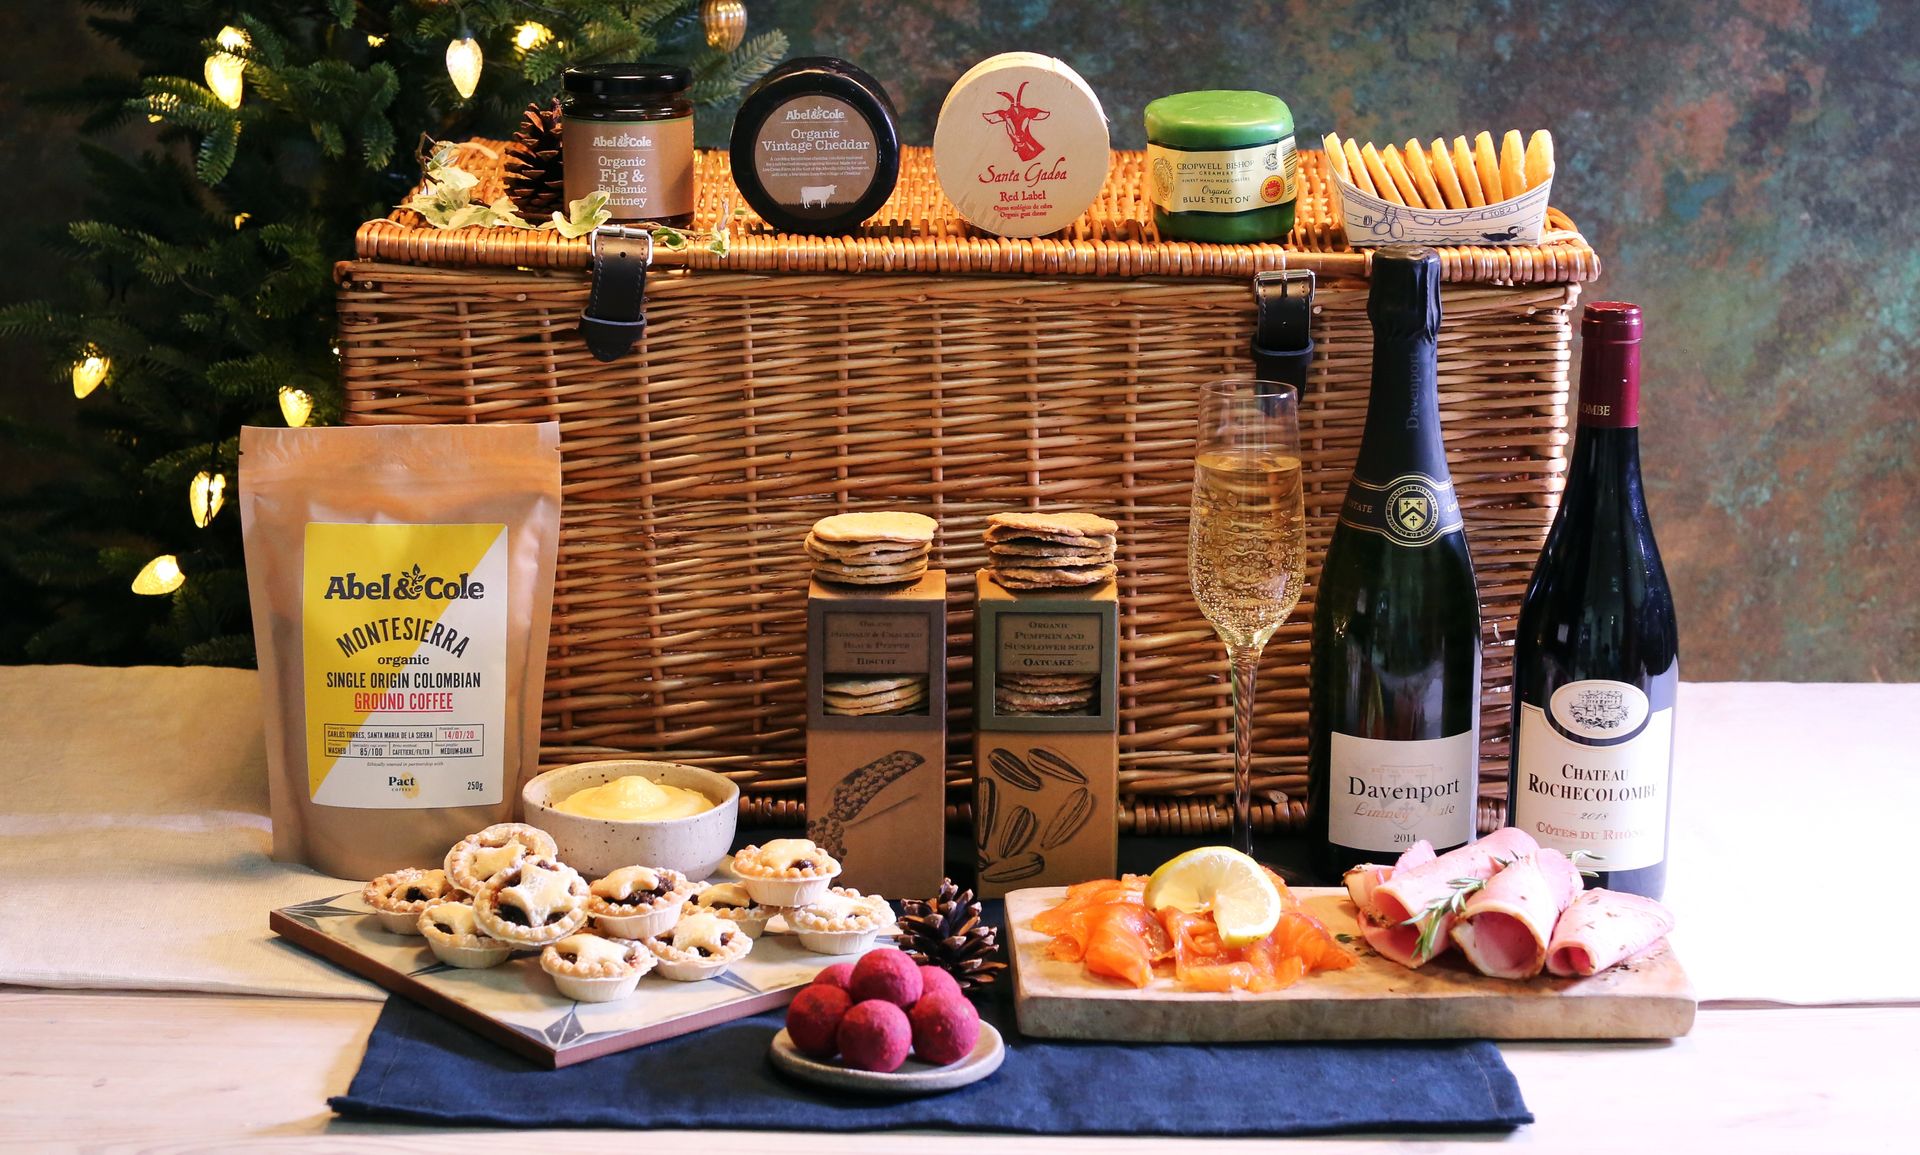 How to make a Christmas hamper – ideas, styles and tips for creating